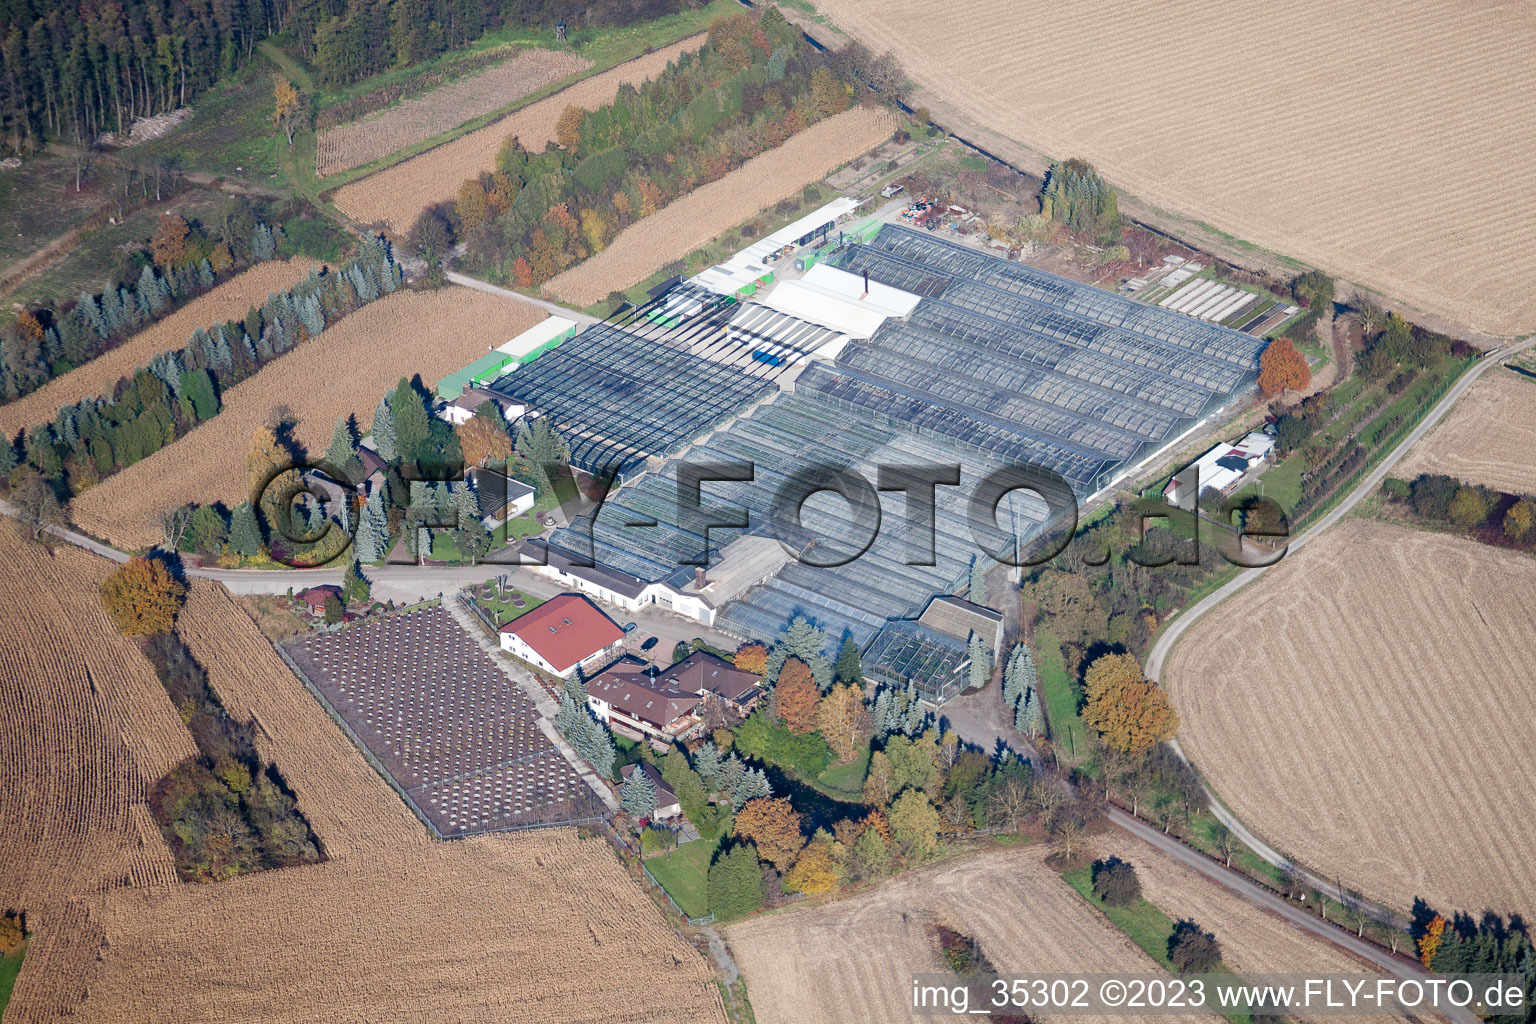 Oblique view of Geranium Endisch GmbH in Hagenbach in the state Rhineland-Palatinate, Germany